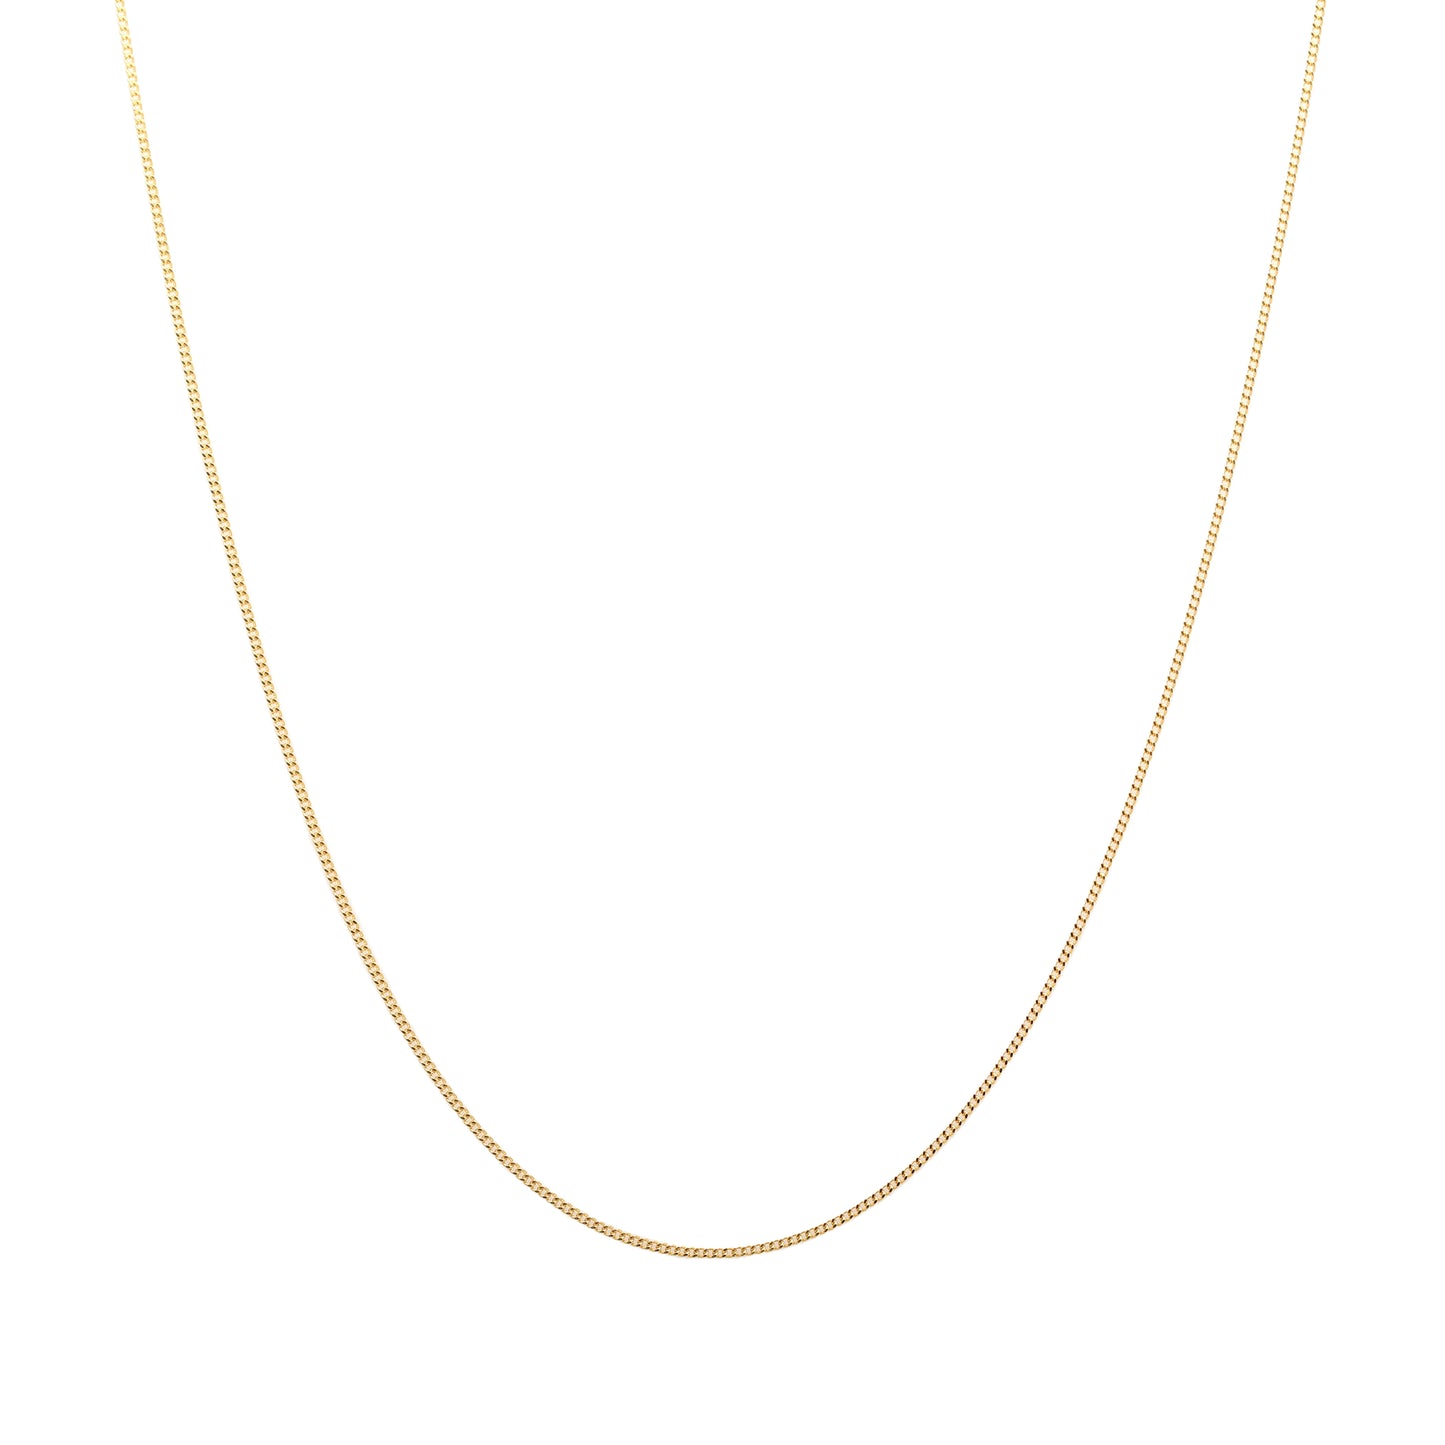 24k Gold Chain 18 Inches